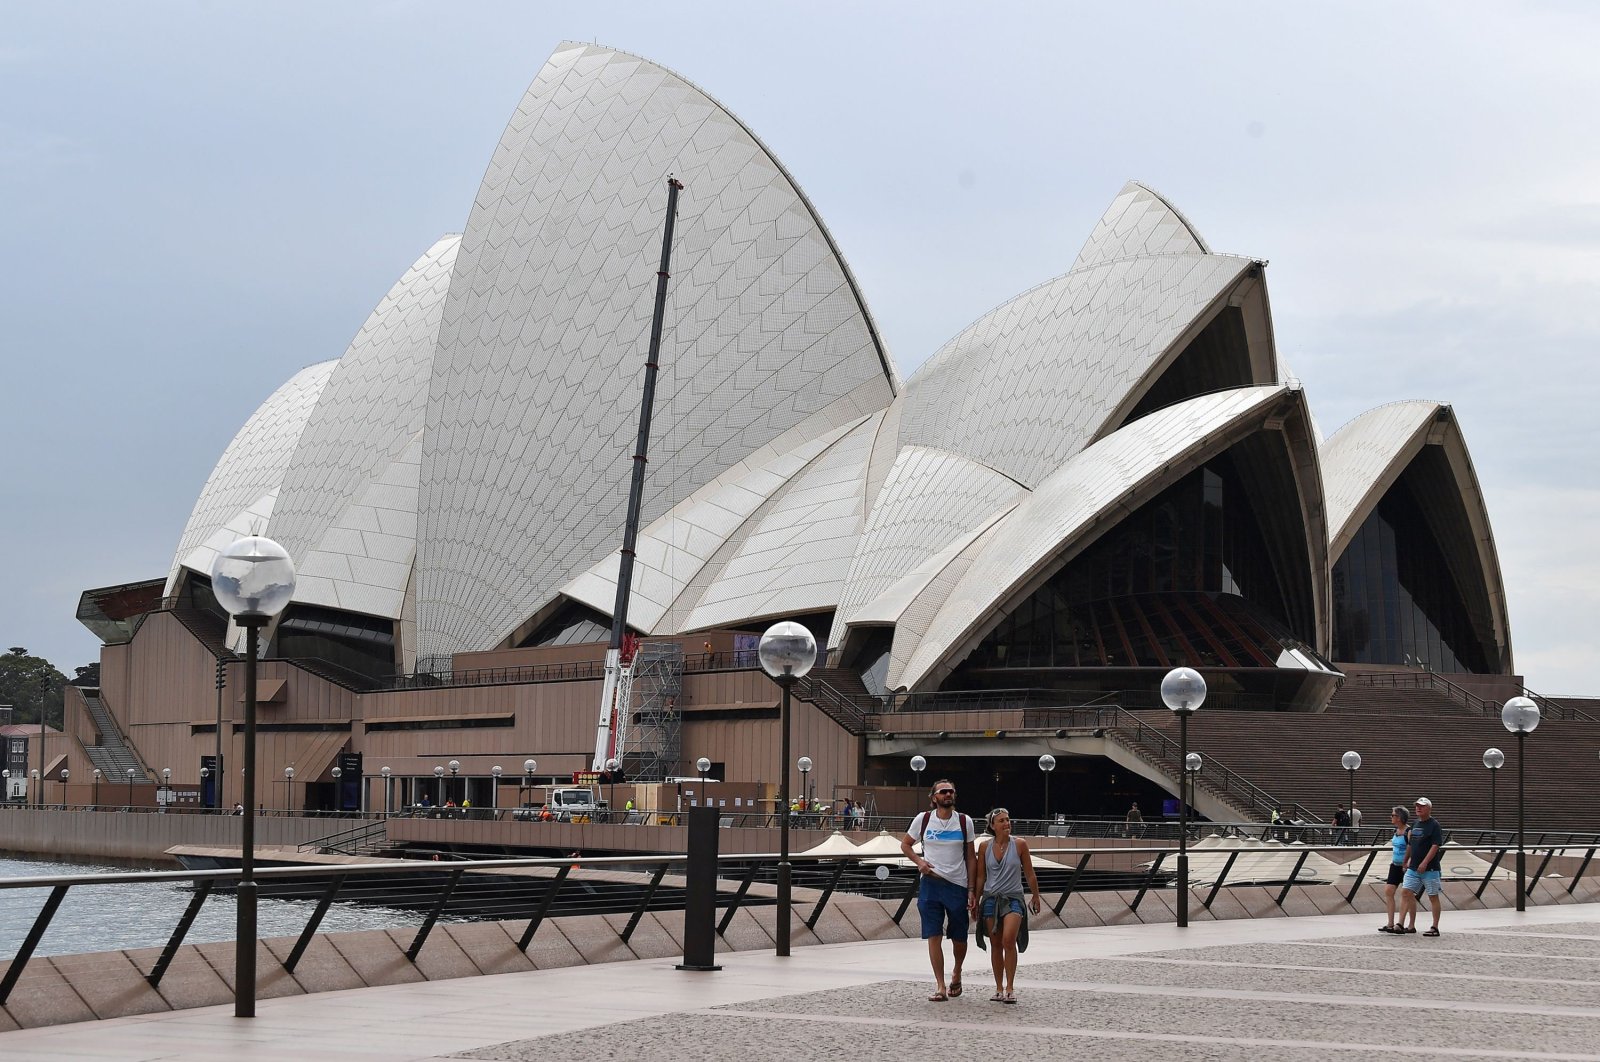 Few people walk along Circular Quay outside the Opera House in Sydney  as people stay away due to restrictions to stop the spread of the COVID-19 coronavirus outbreak, Australia, March 25, 2020. (AFP Photo)